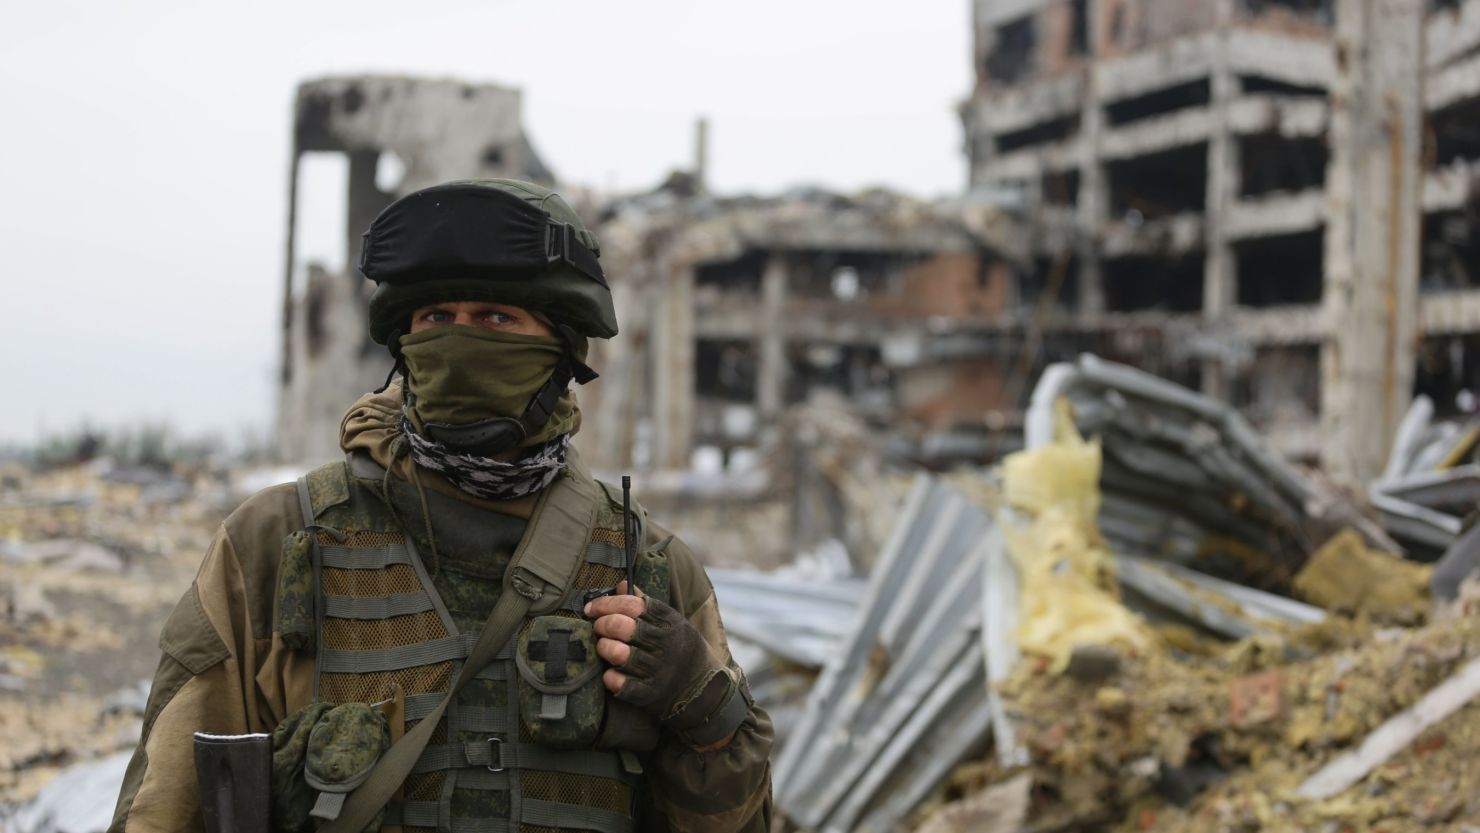 An armed pro-Russian separatist of the self-proclaimed Donetsk People's Republic (DNR) stands in front of the destroyed Donetsk International Airport, in Donetsk.